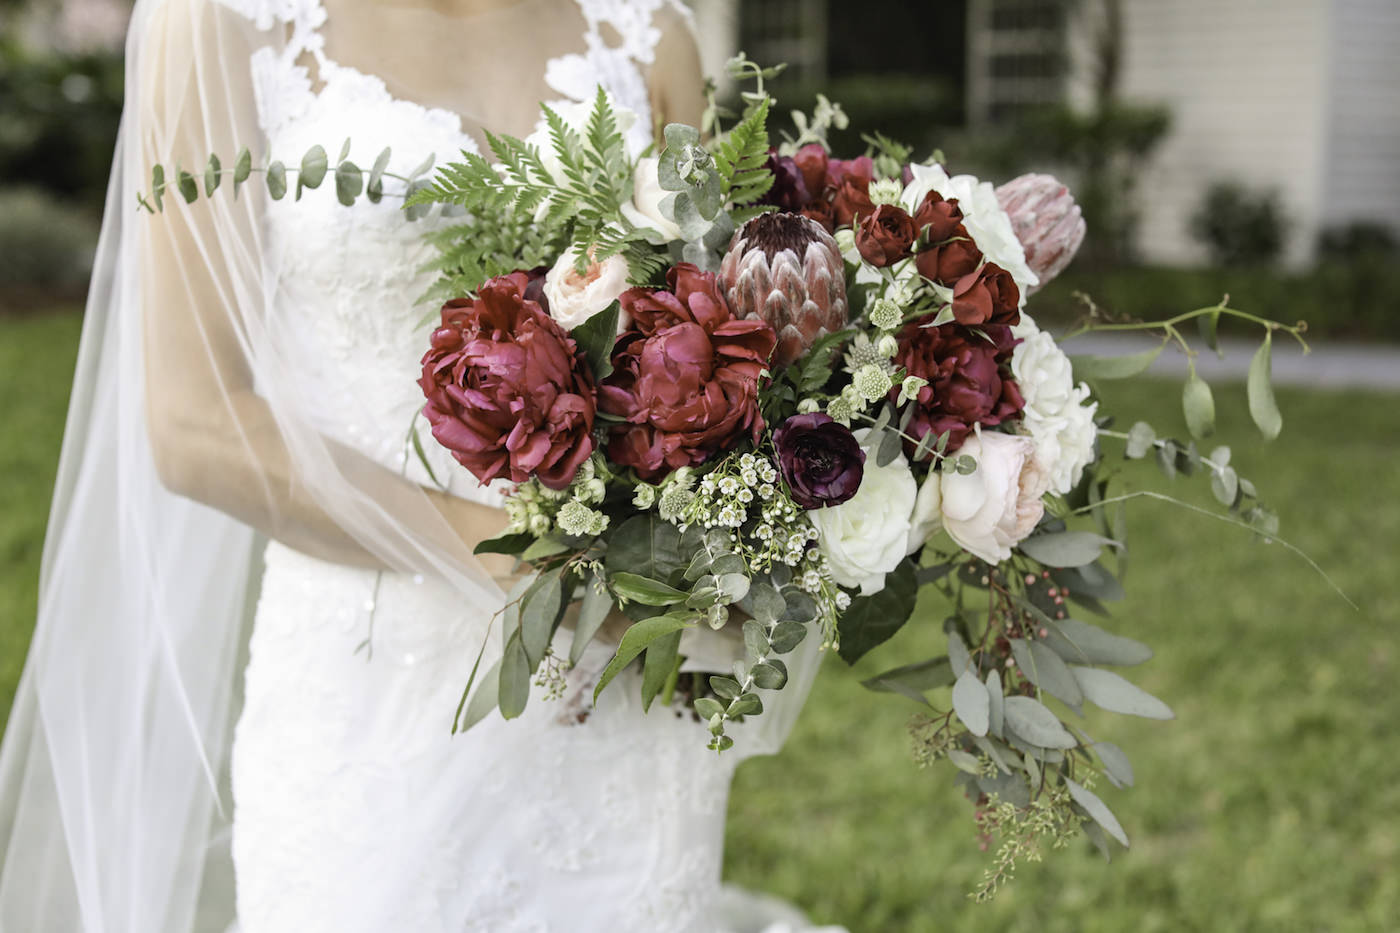 Bride Holding Bright Colorful, Red, Blush Pink and Ivory Roses with Greenery Floral Bouquet | Wedding Photographer Lifelong Photography Studio | Tampa Wedding Planner Blue Skies Weddings and Events